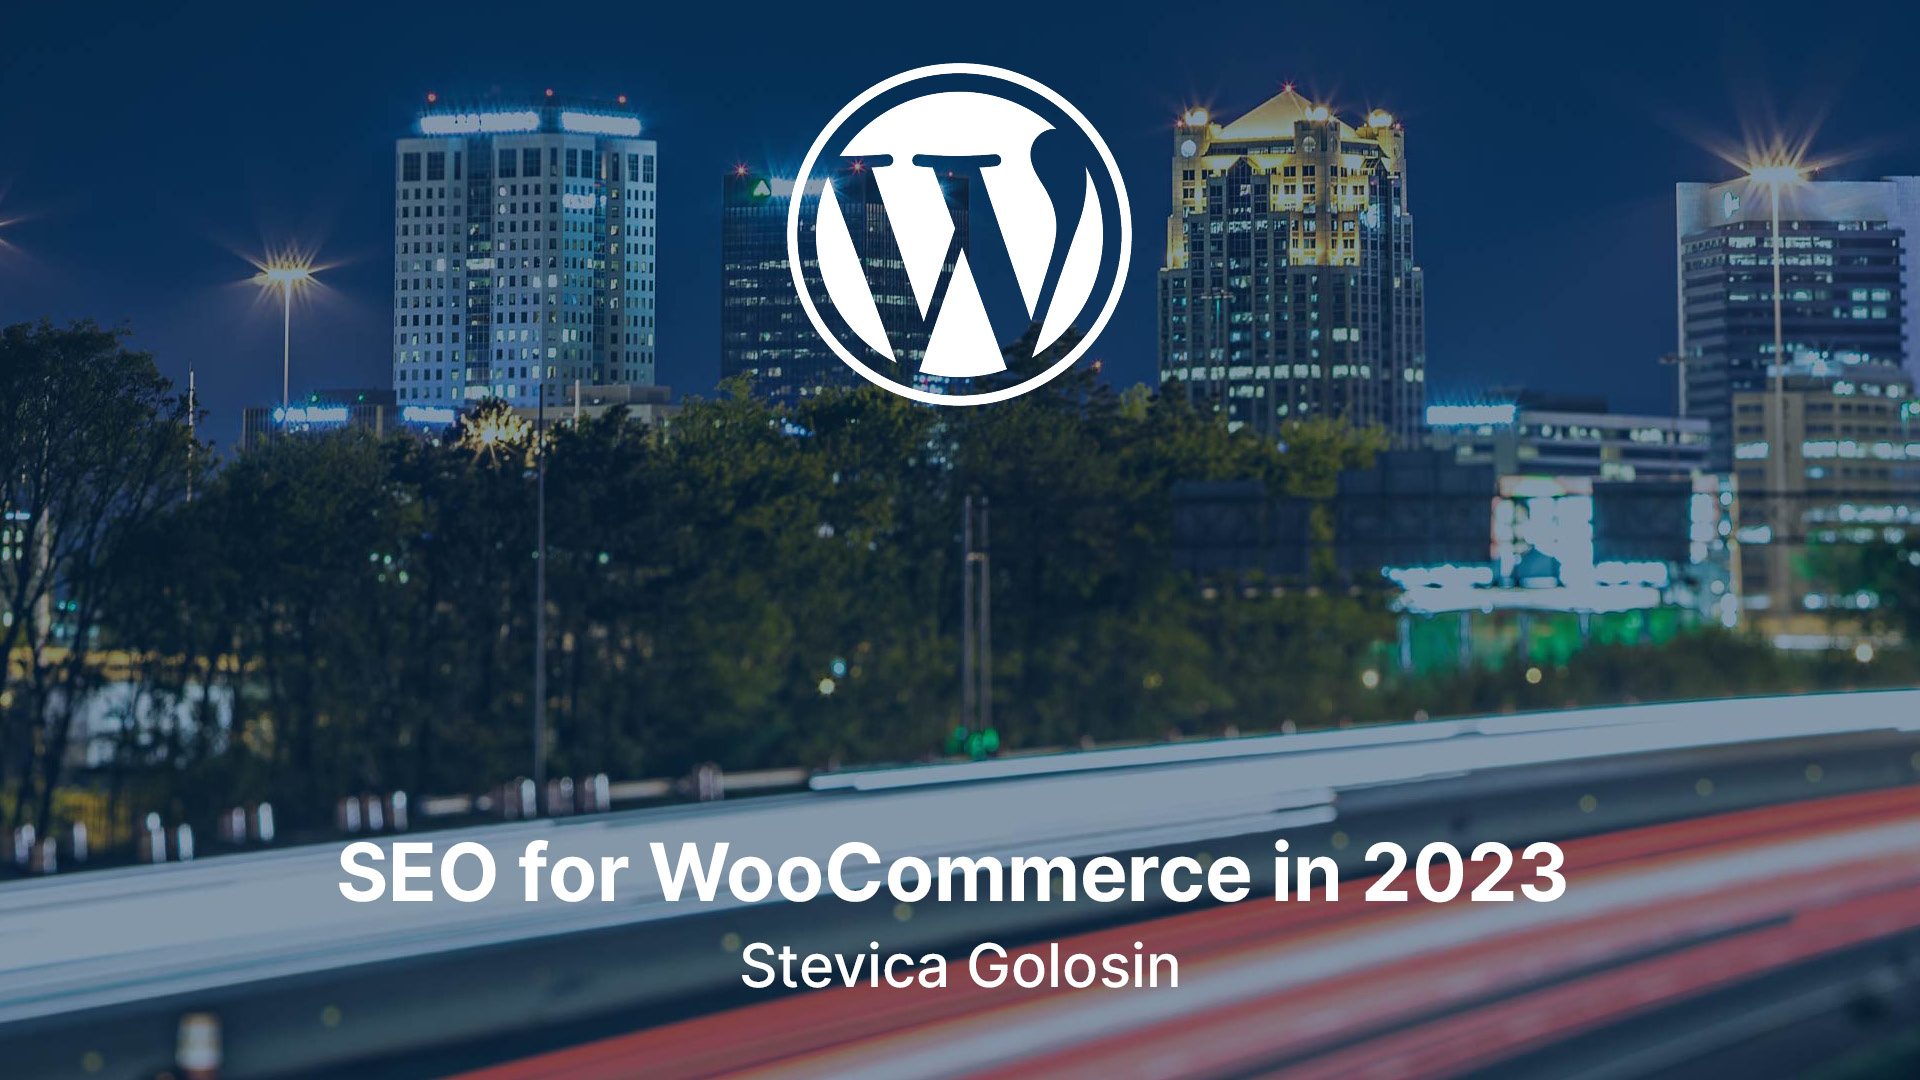 SEO for WooCommerce in 2023